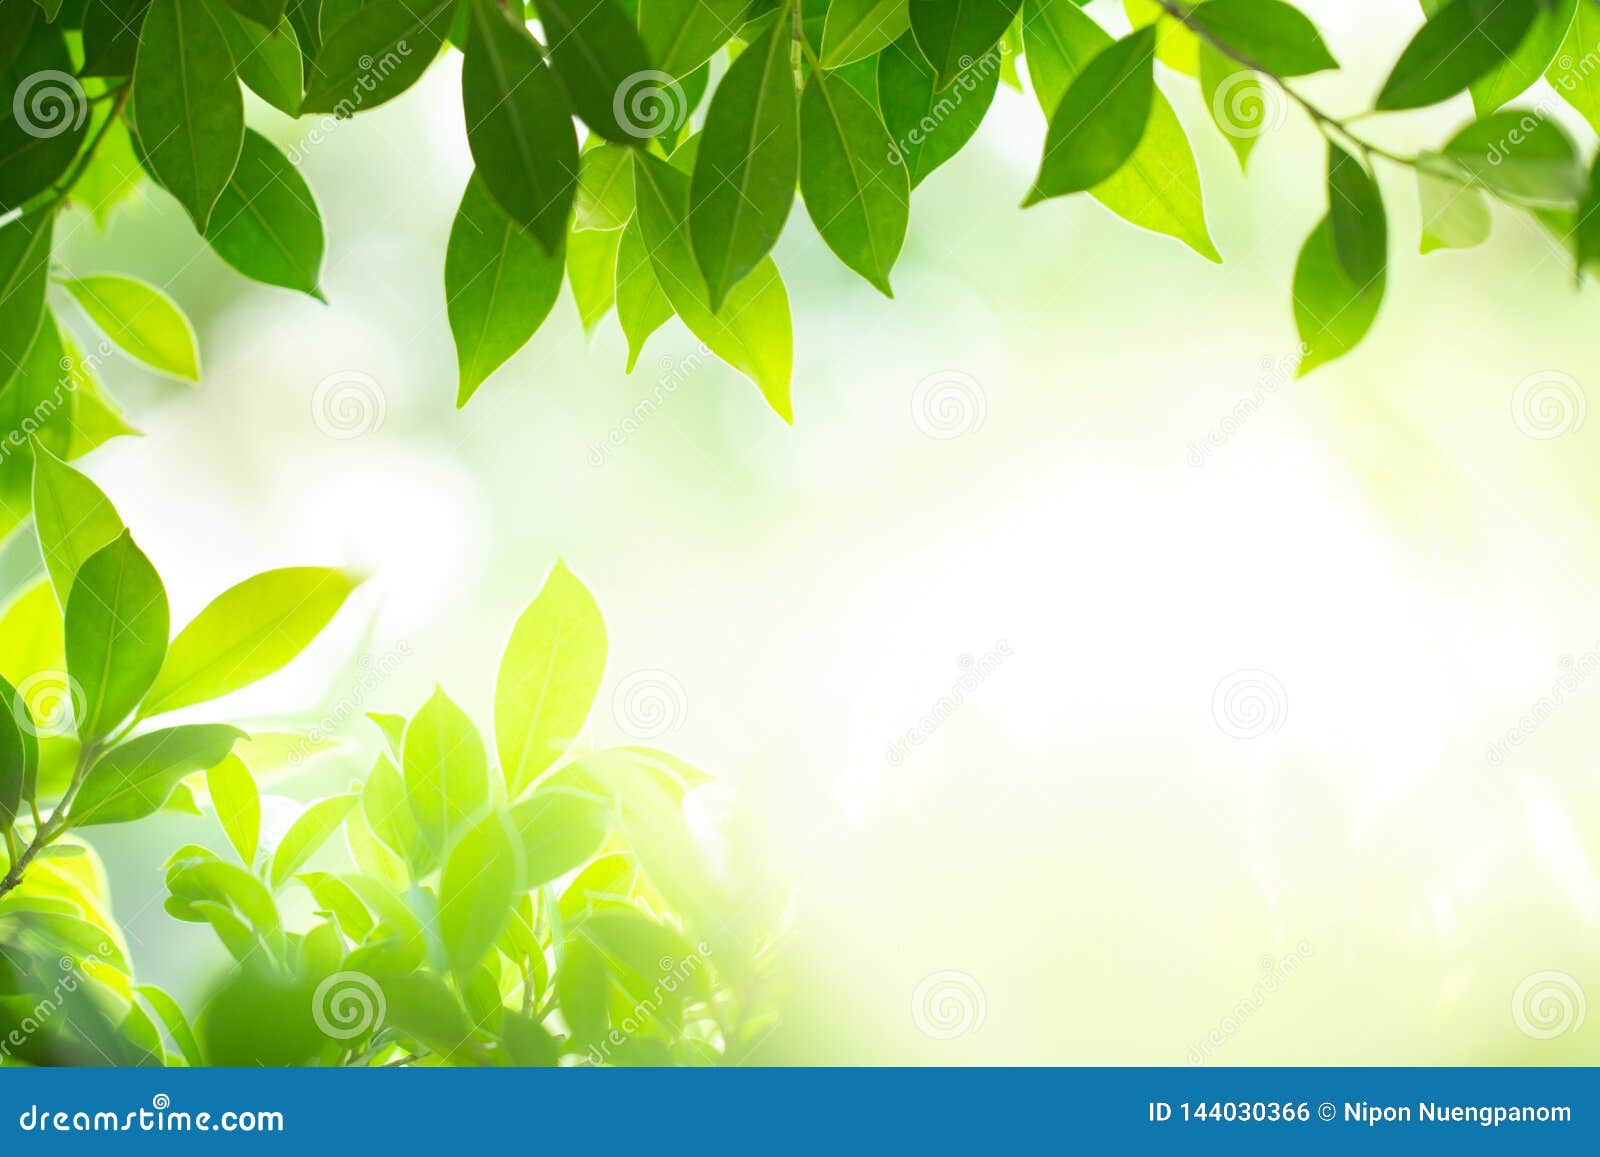 Green Leaves Under Sunlight on Blurred Background Stock Photo - Image of  color, blur: 144030366